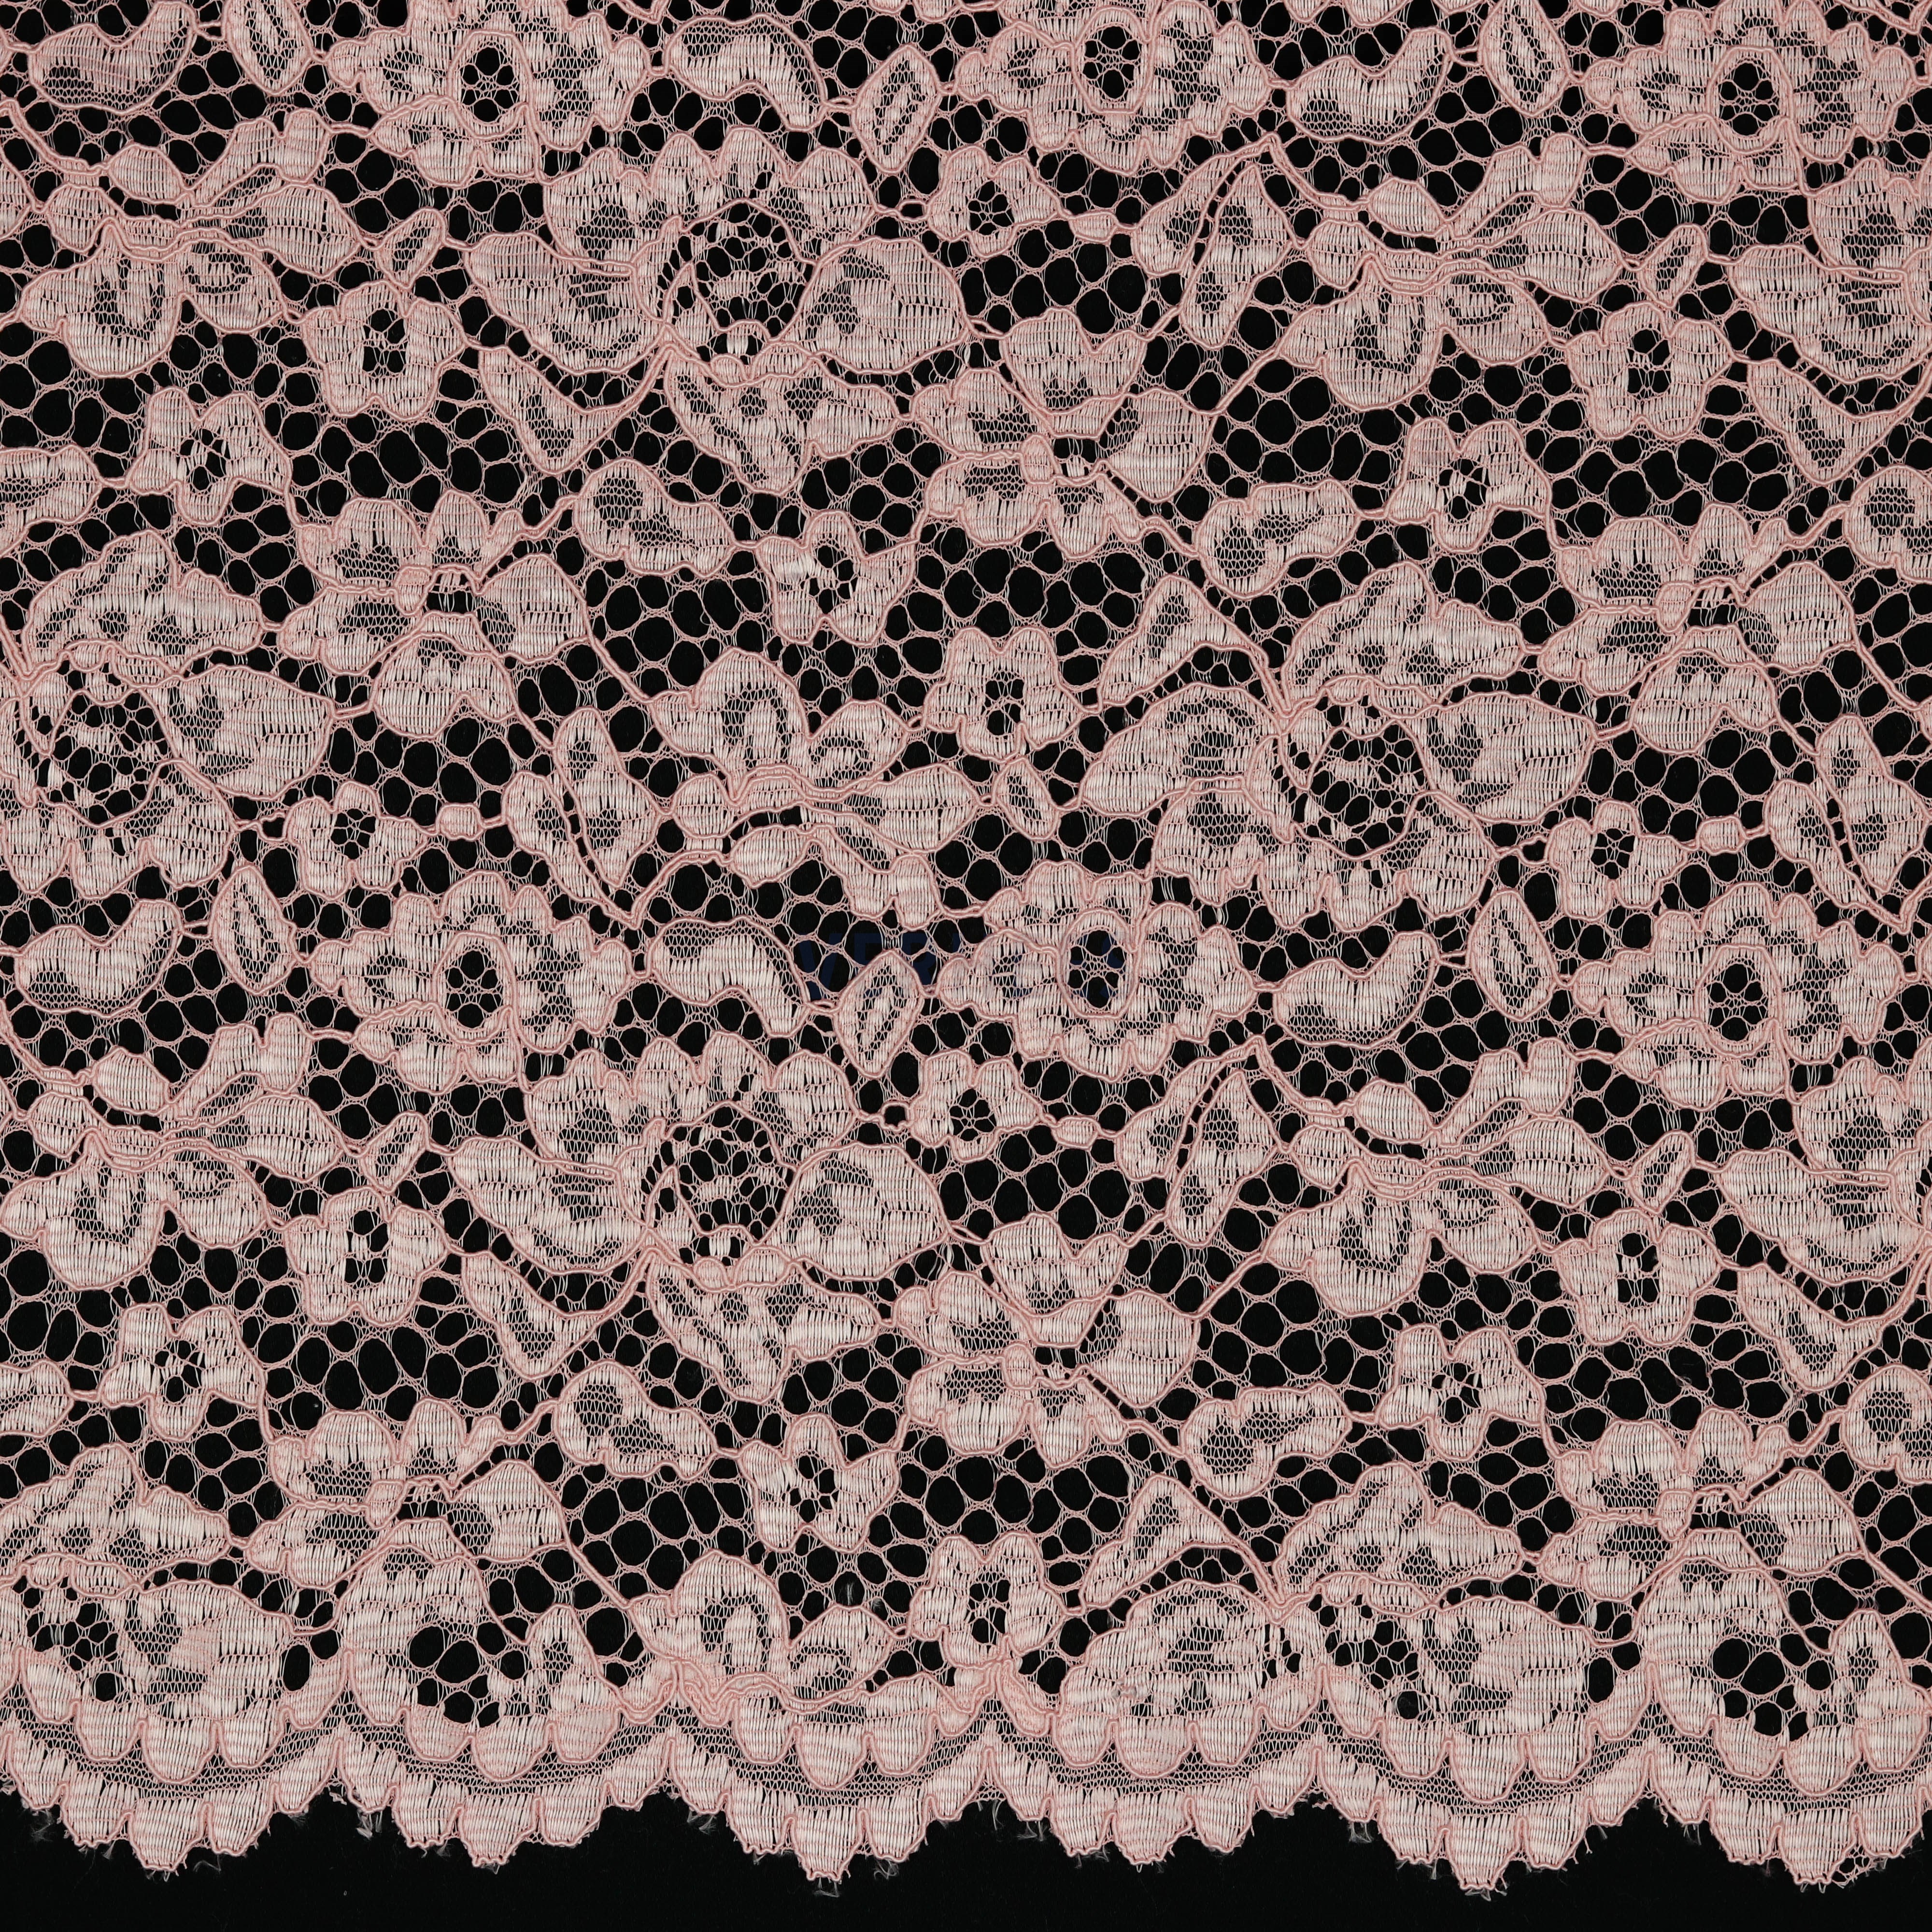 LACE BORDER 2 SIDES ROSE (high resolution)